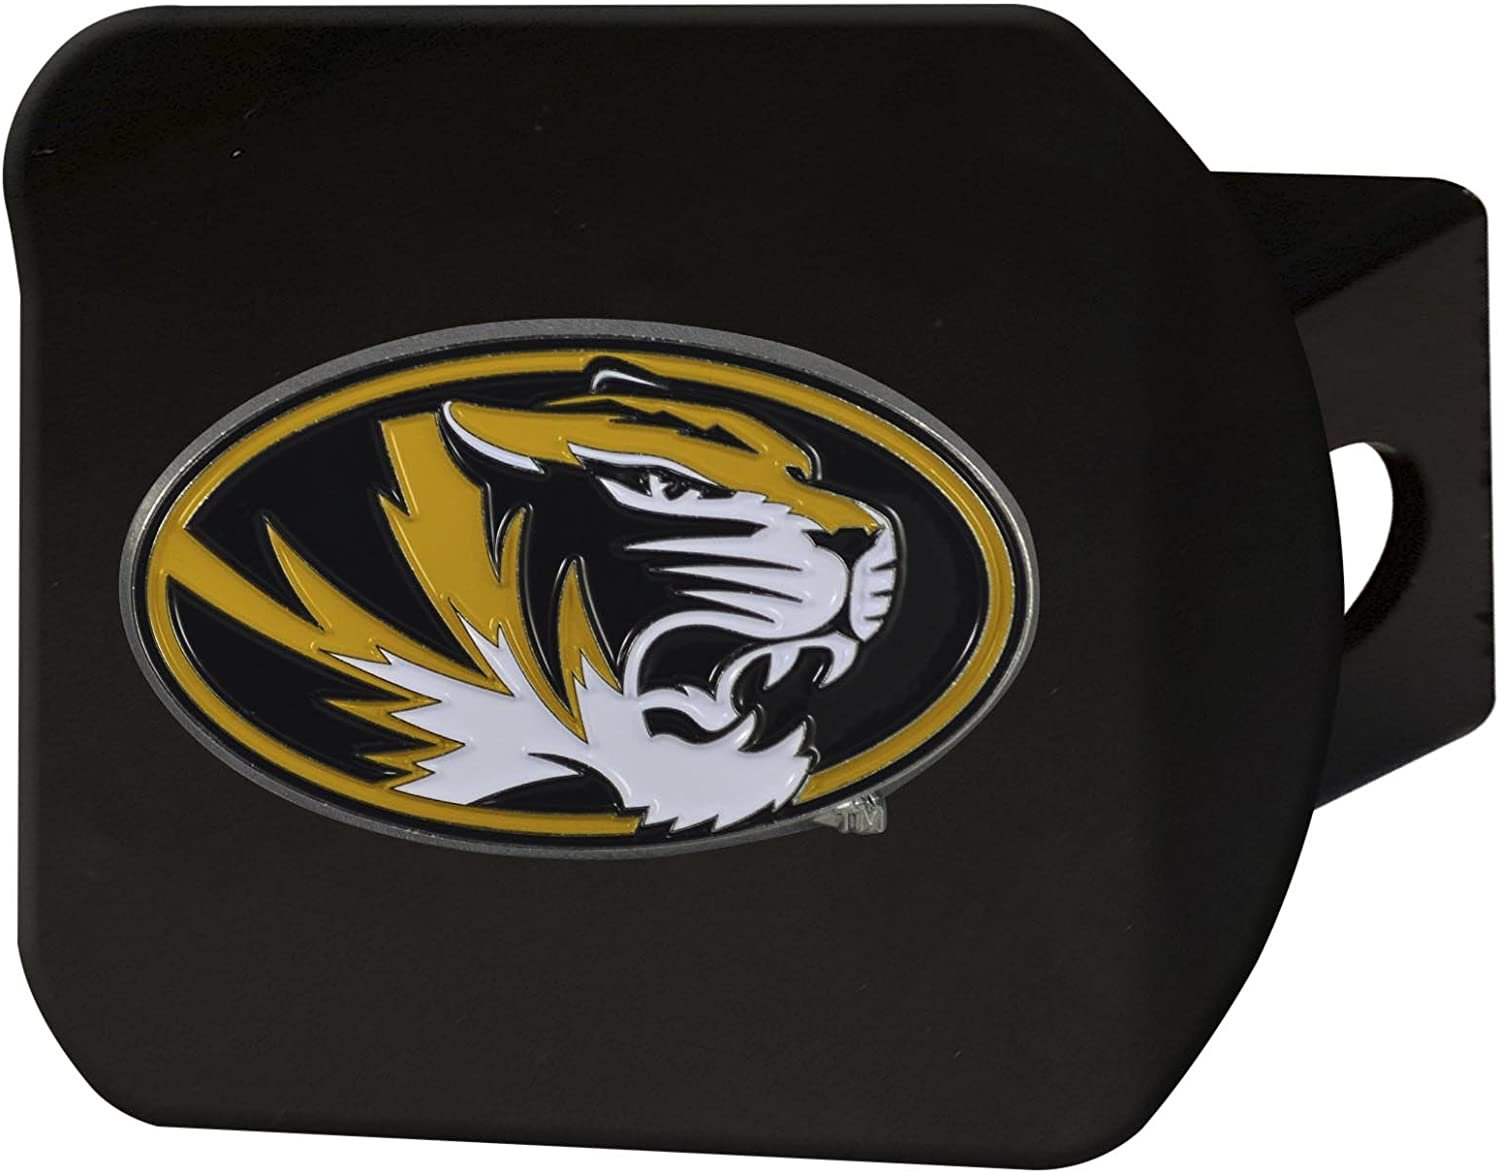 Missouri Tigers Solid Metal Black Hitch Cover with Color Metal Emblem 2 Inch Square Type III University of